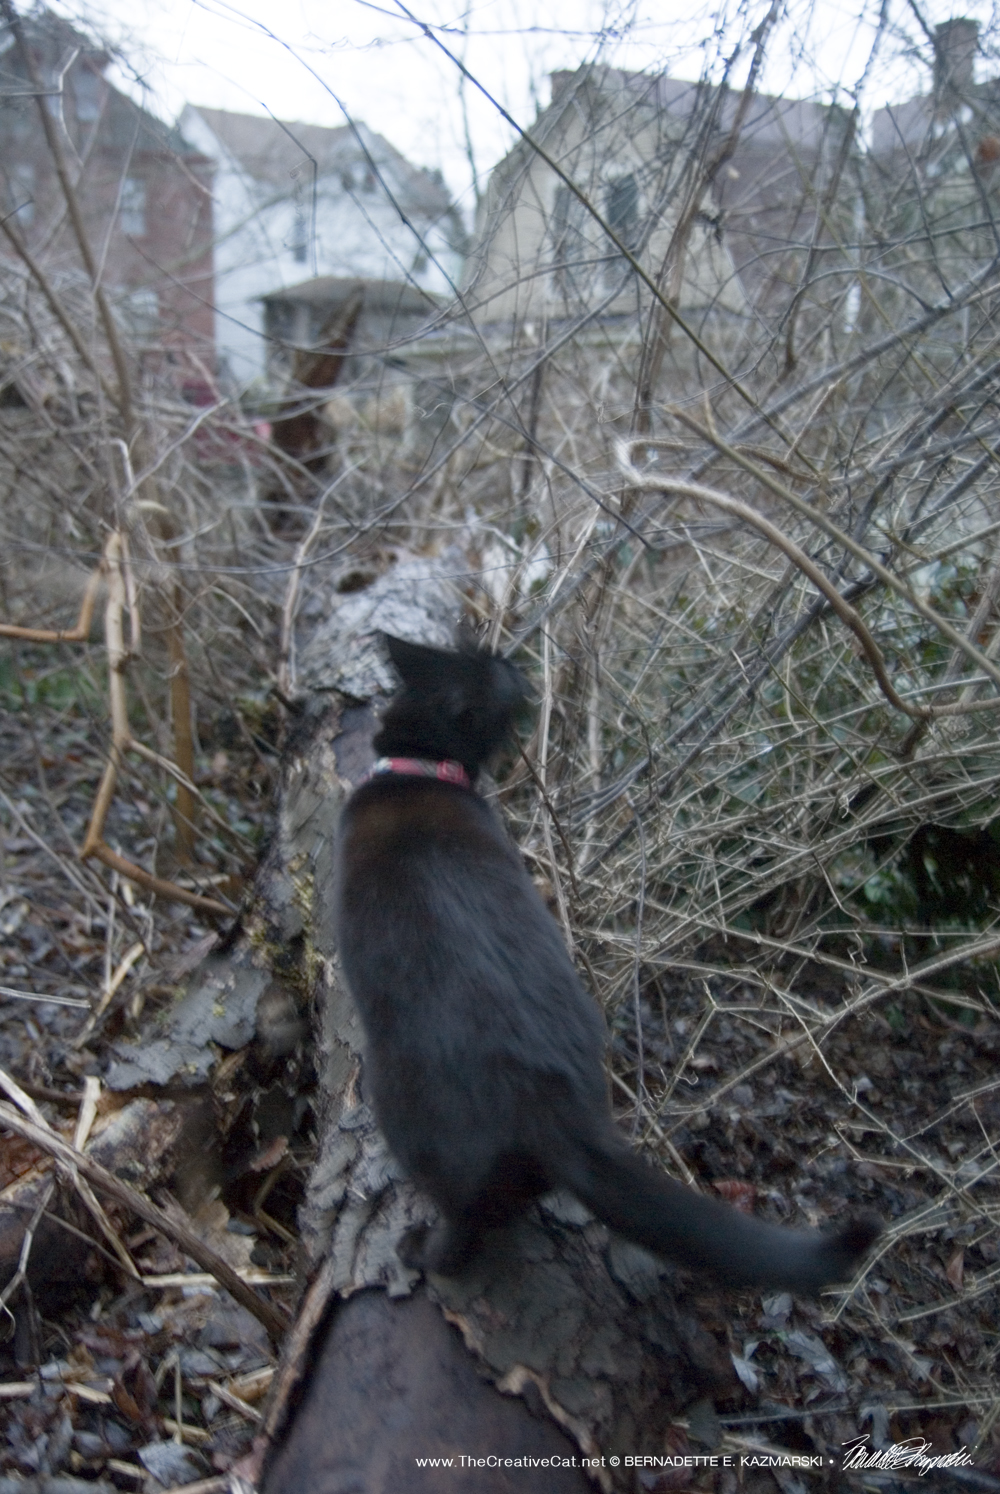 Mimi walks along the tree trunk on the ground.